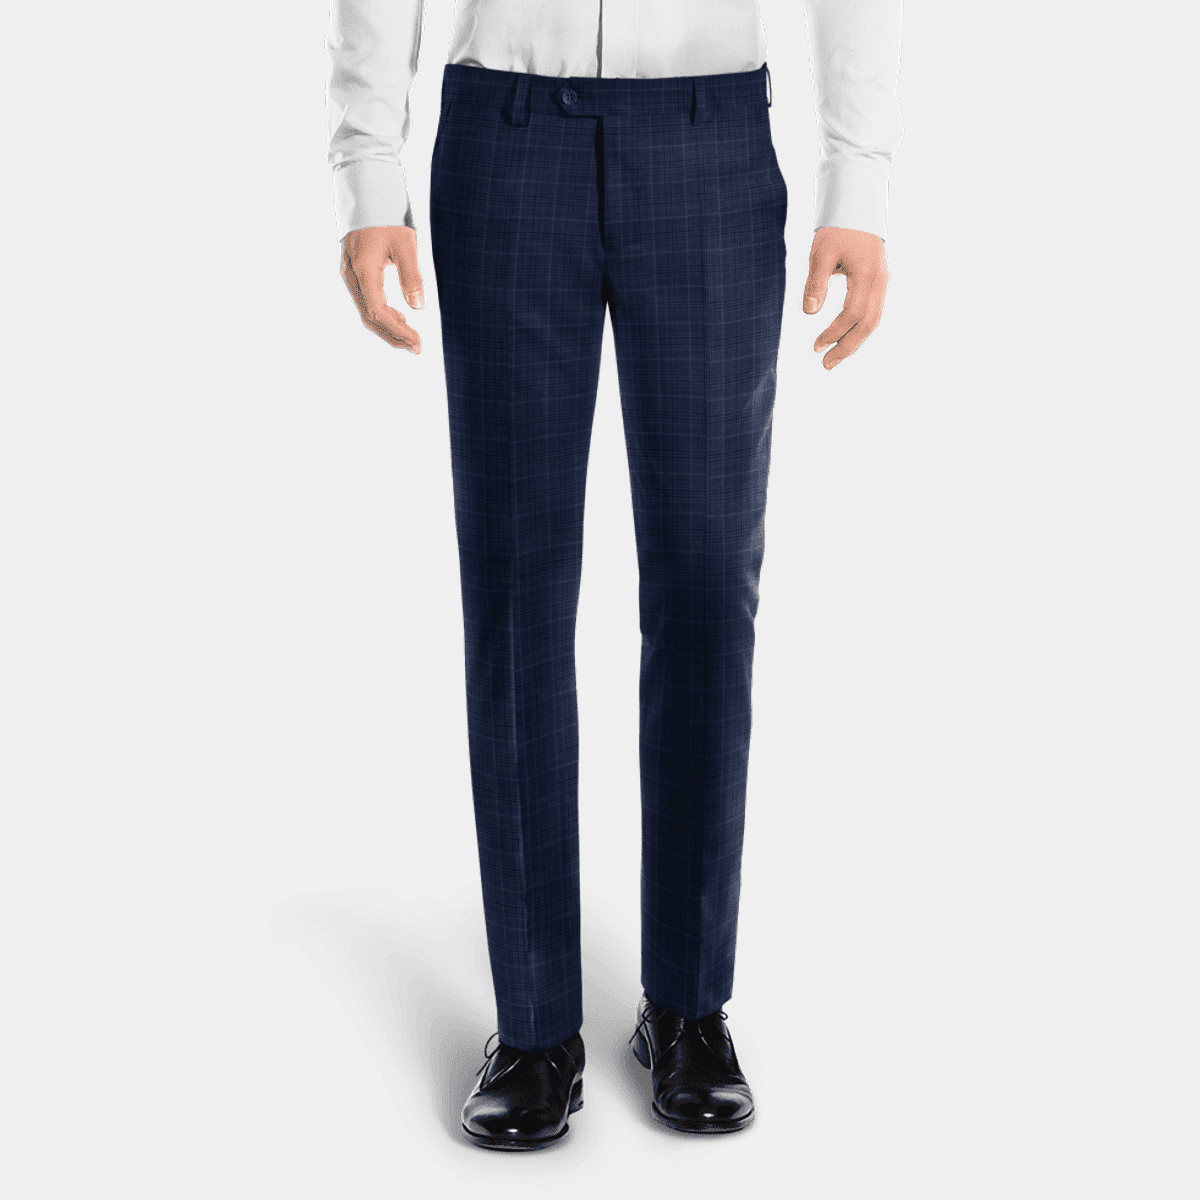 Men's Pant's-Checked Textured Blue Pants, Blue Checked Trousers with  Texture | WAM DENIM